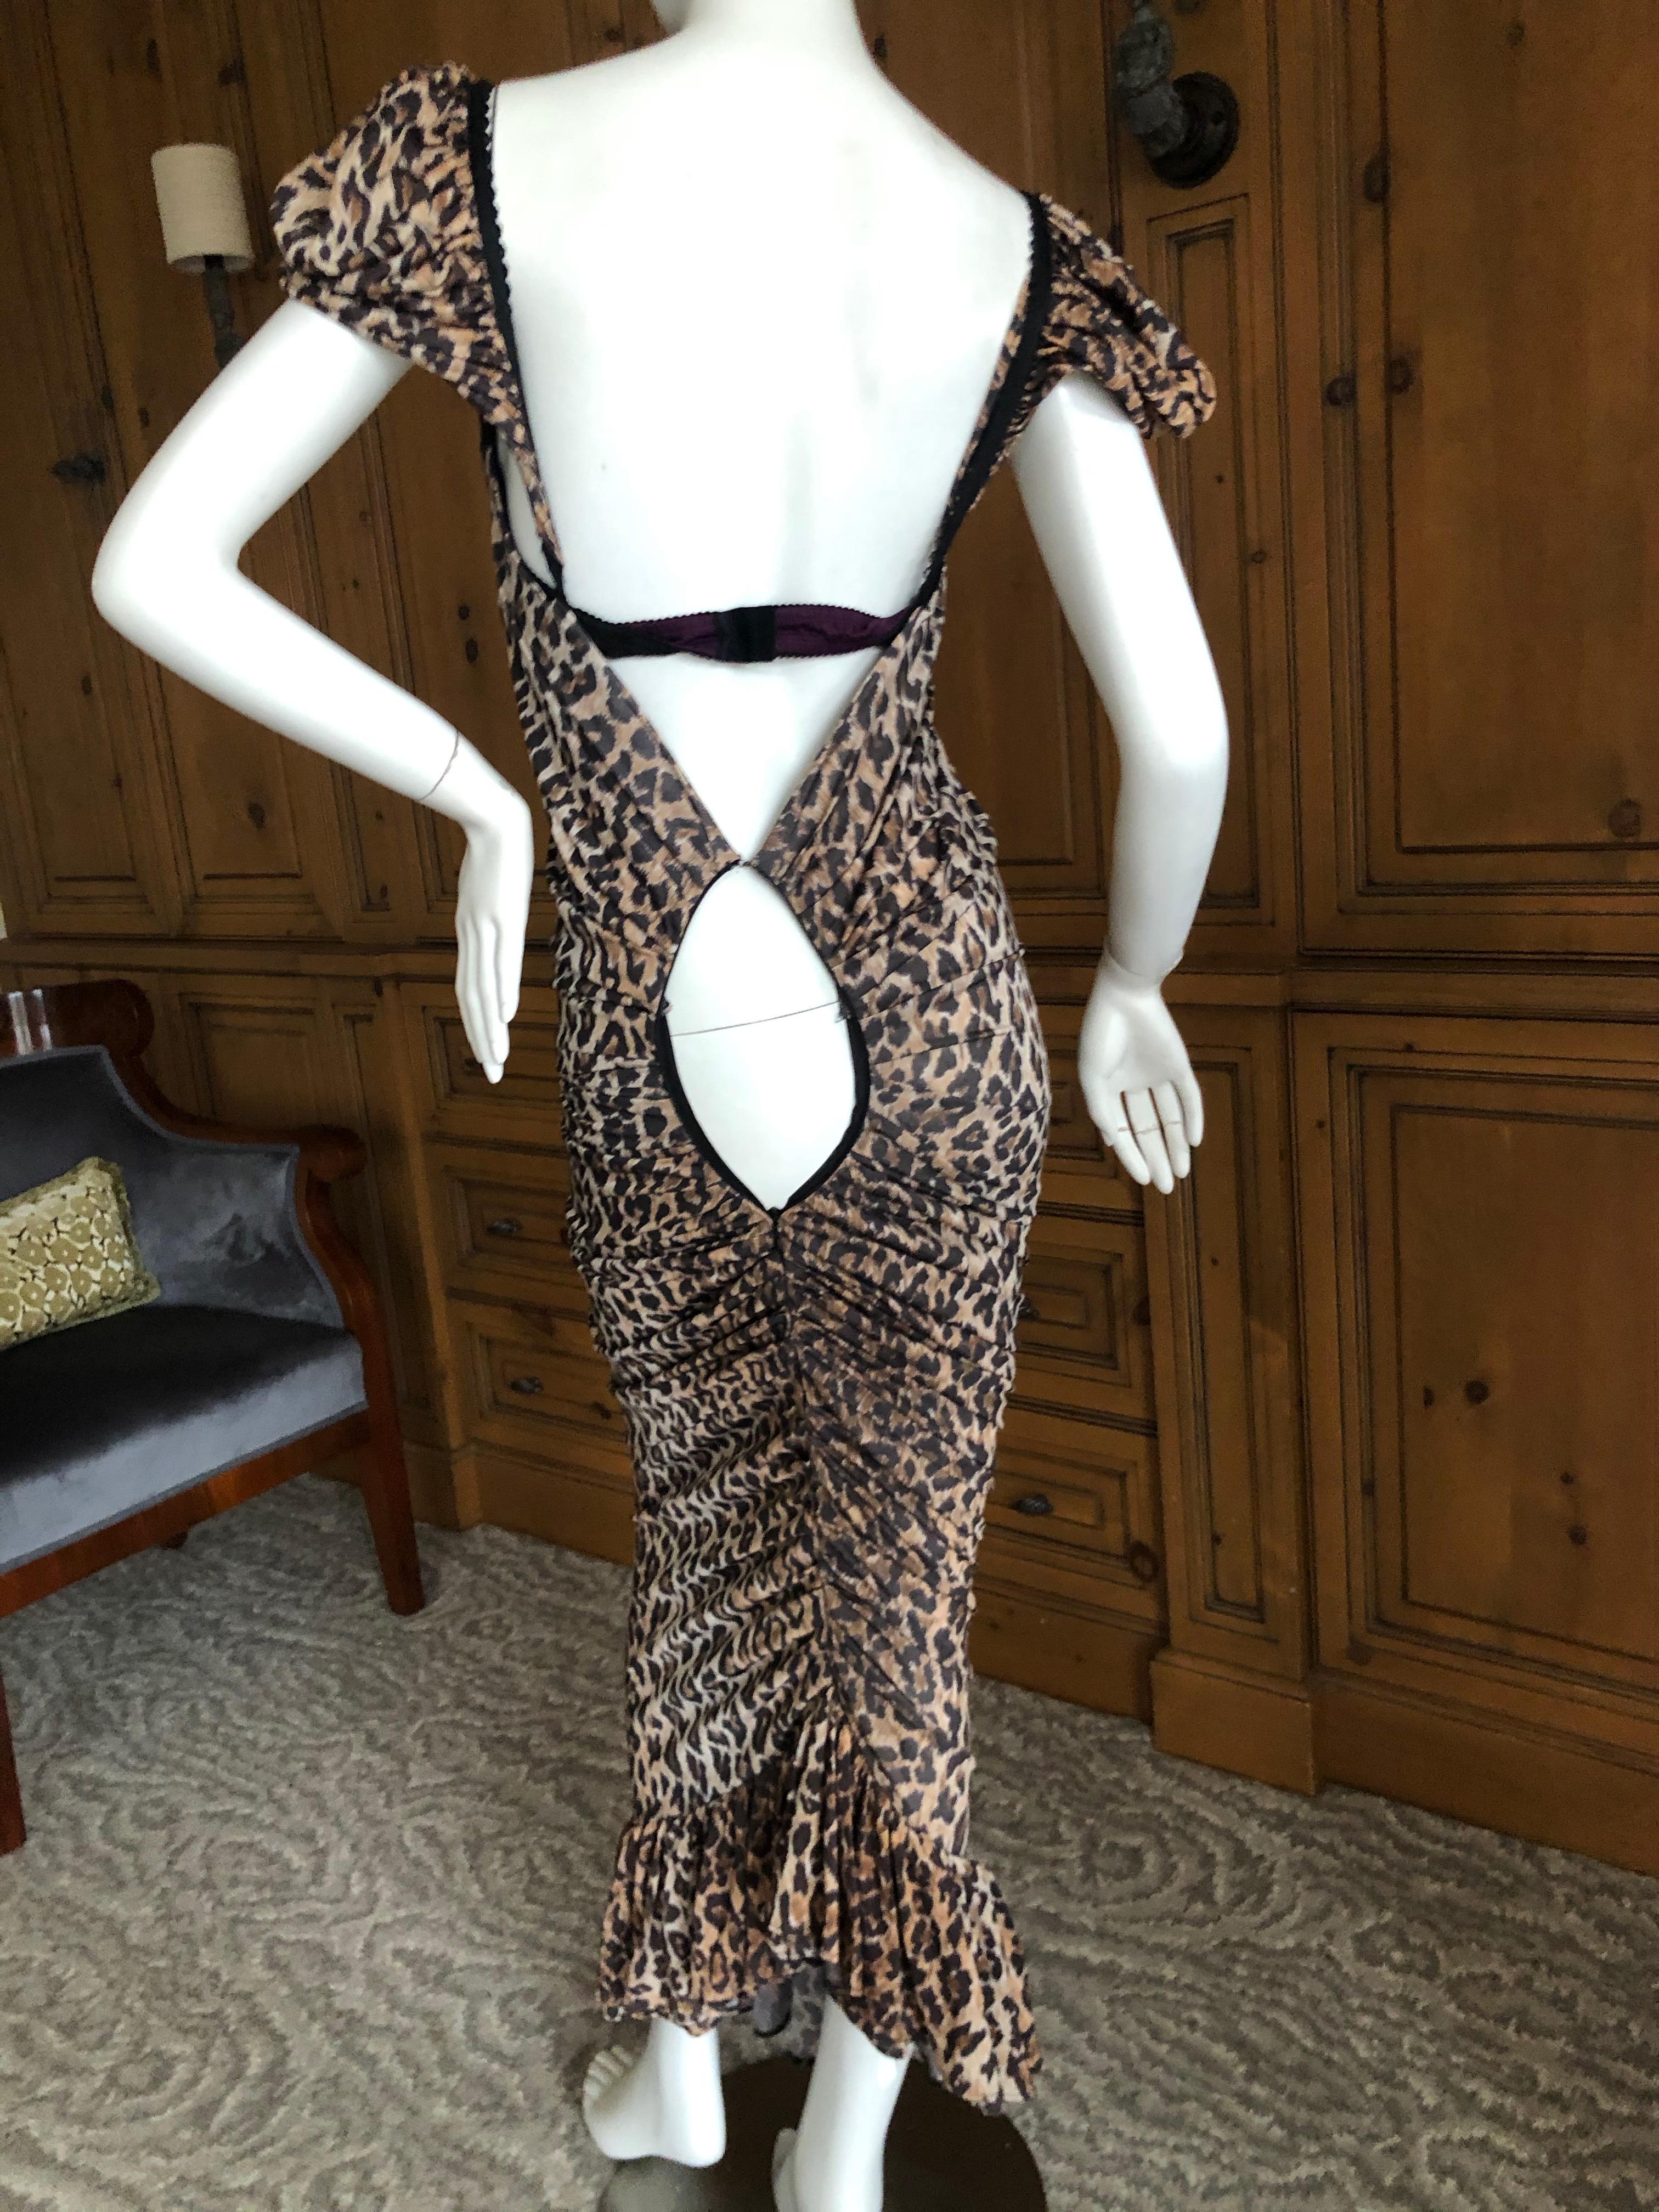 Dolce & Gabbana for D&G Vintage Leopard Print Cocktail Dress with Attached Bra For Sale 4